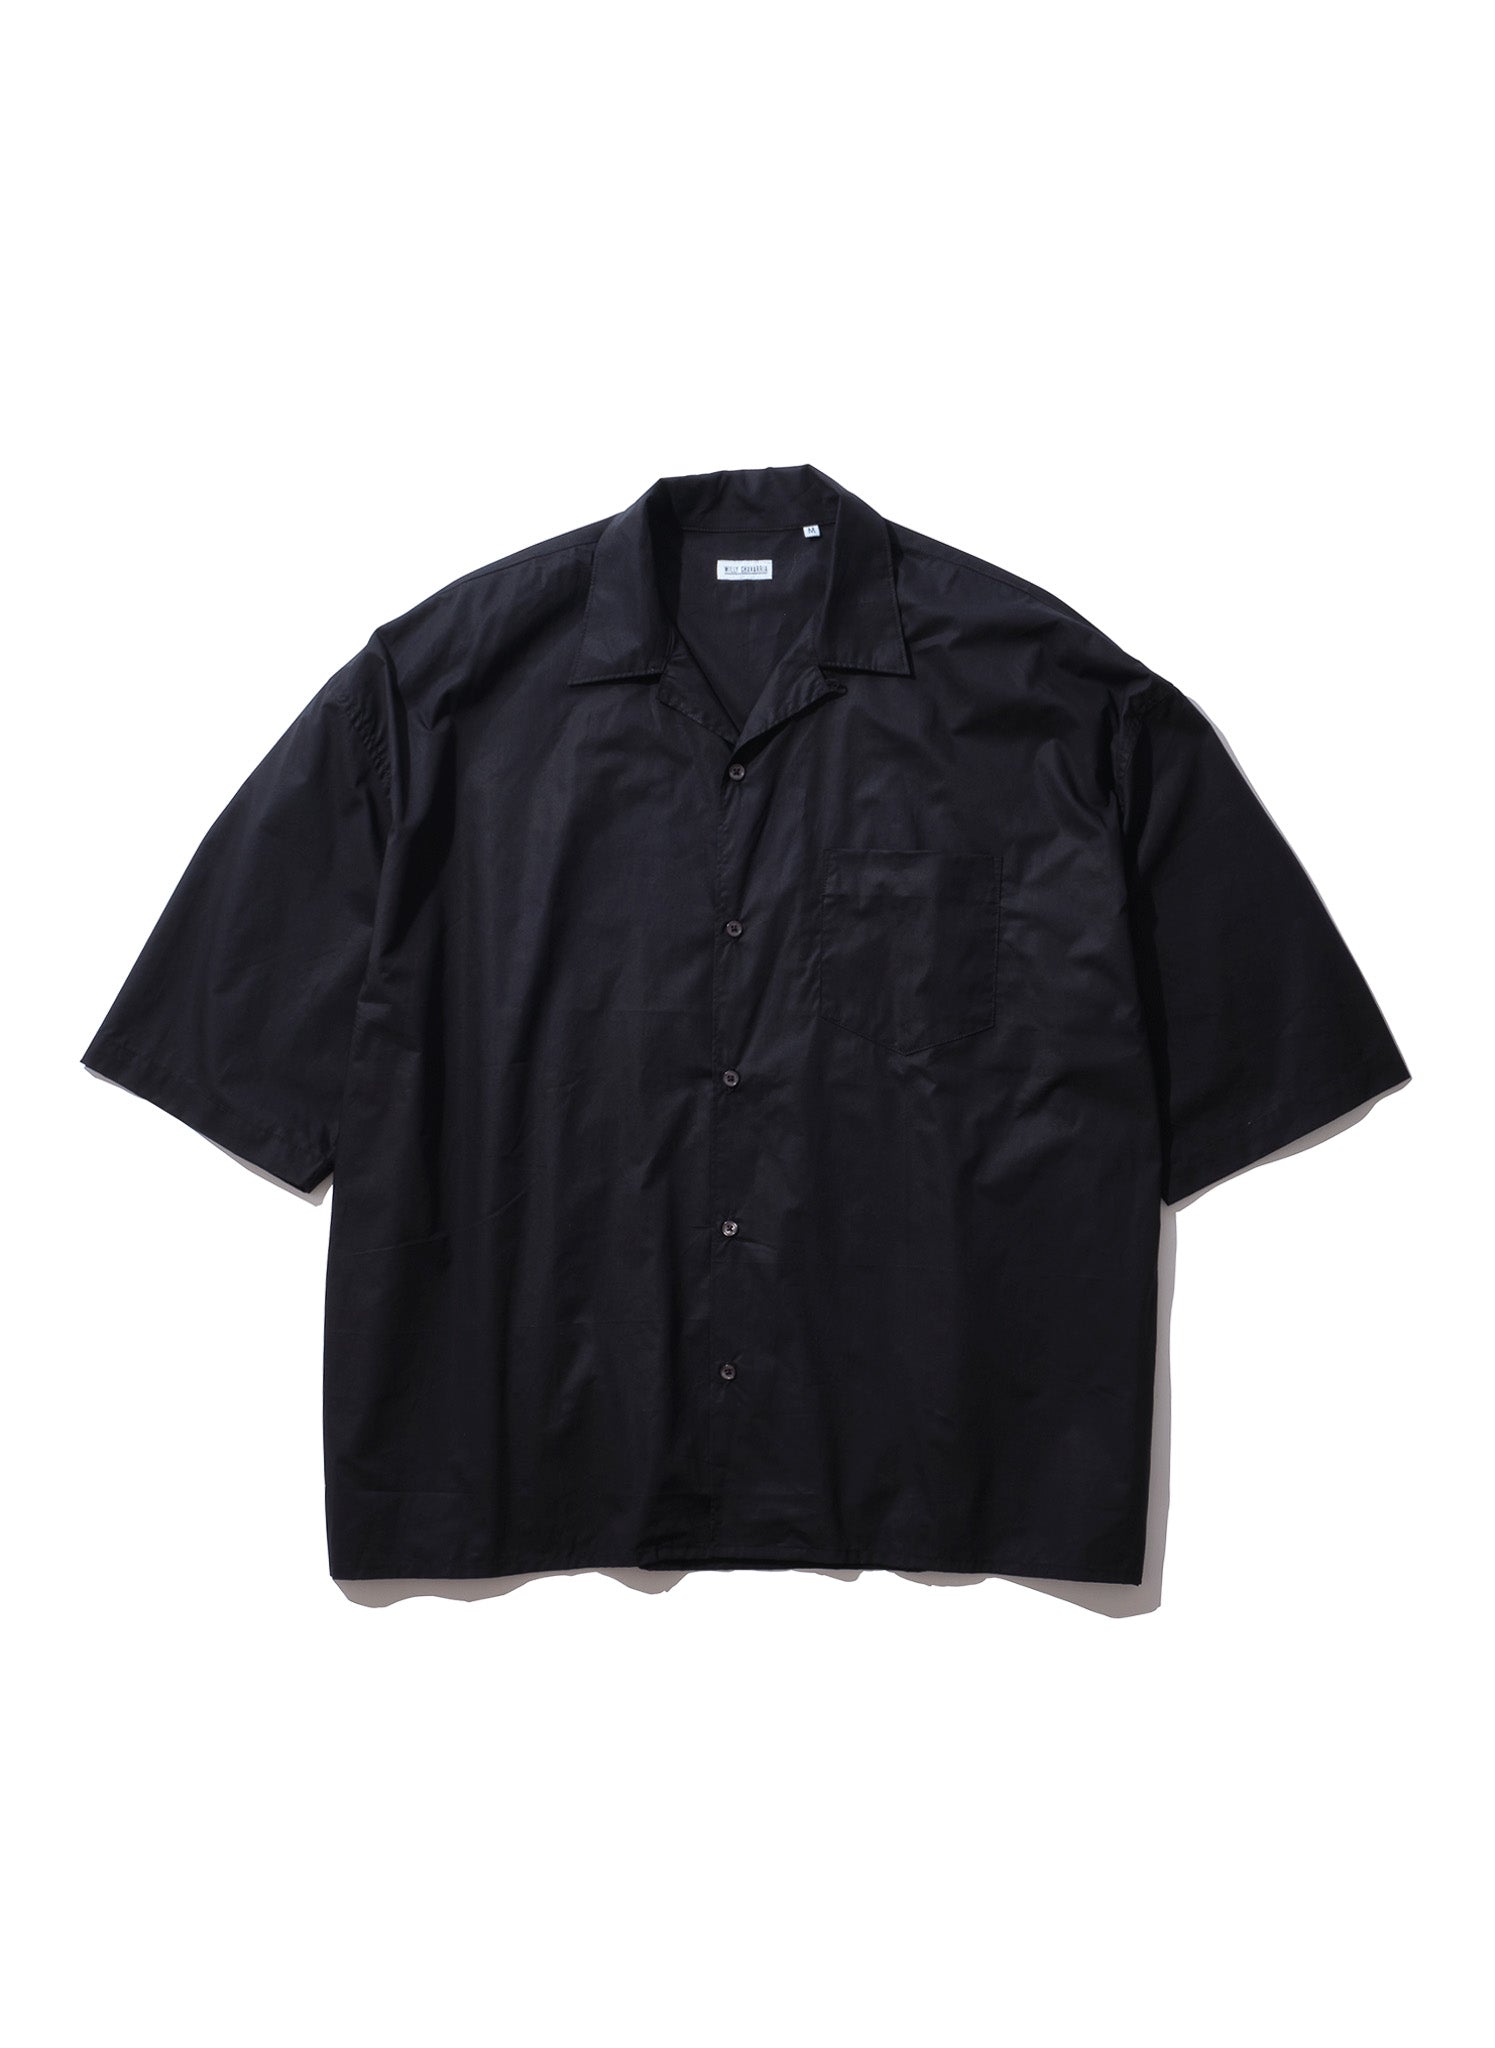 WILLY CHAVARRIA / OPEN COLLARED SHIRT BLACK